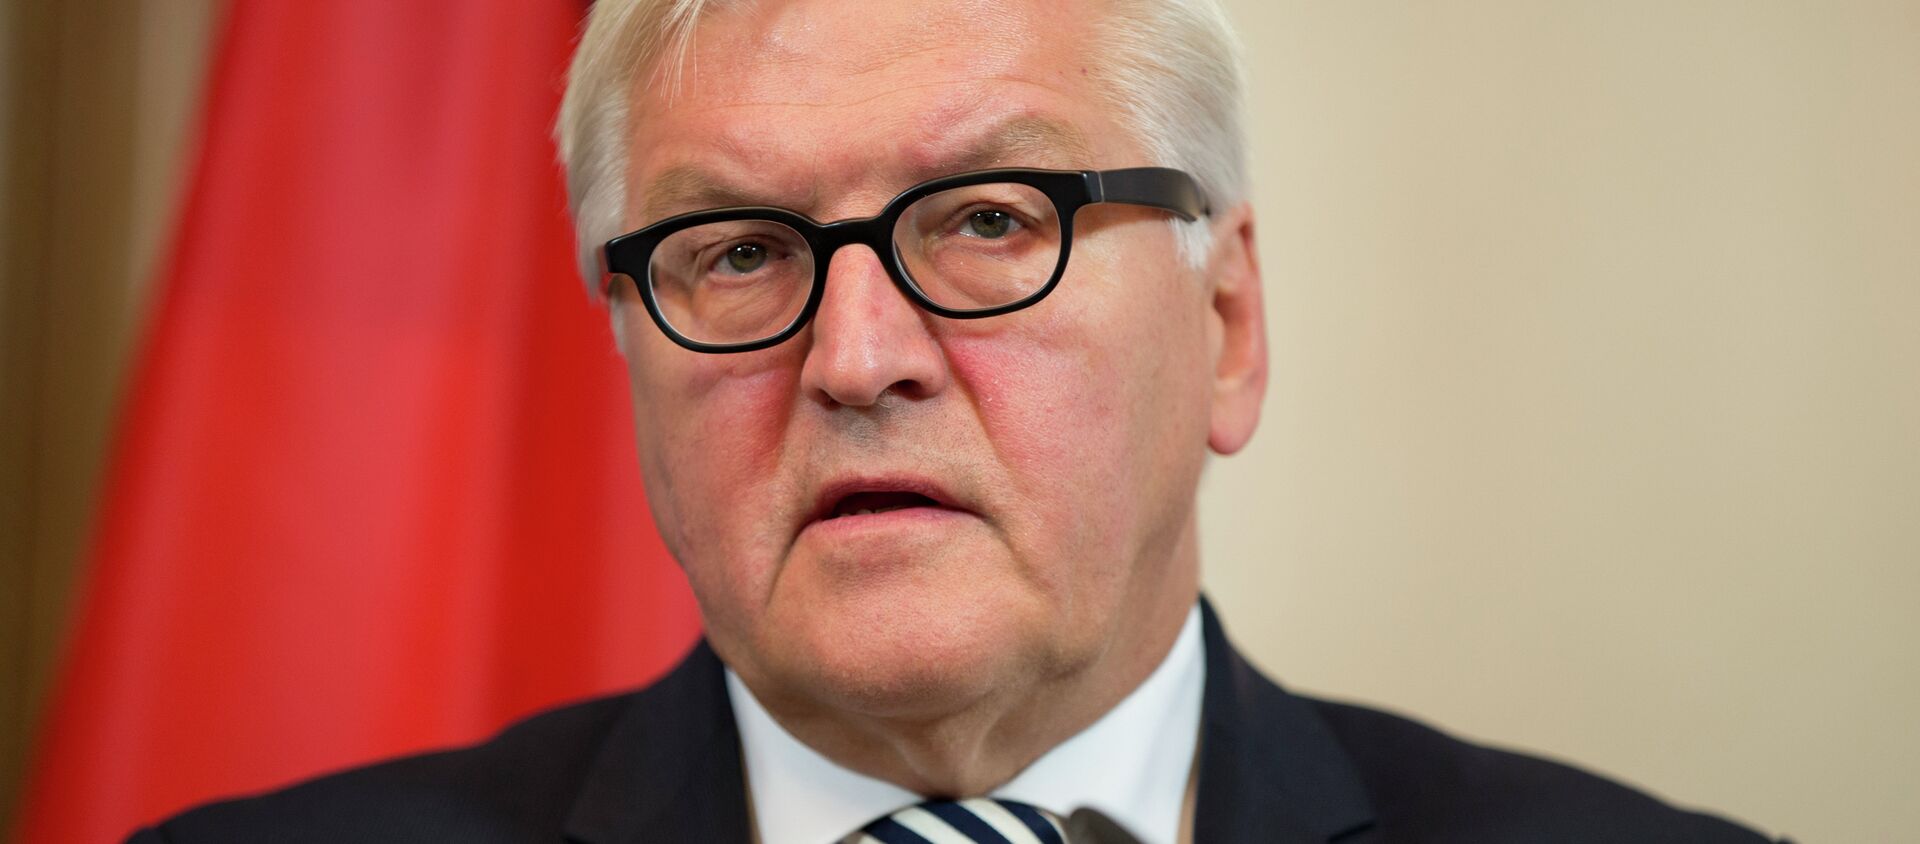 German Foreign Minister Frank-Walter Steinmeier speaks about the ongoing crisis in Syria during a news conference with U.S. Secretary of State John Kerry at Villa Borsig, Berlin, Sunday, Sept. 20, 2015 - اسپوتنیک افغانستان  , 1920, 12.02.2017